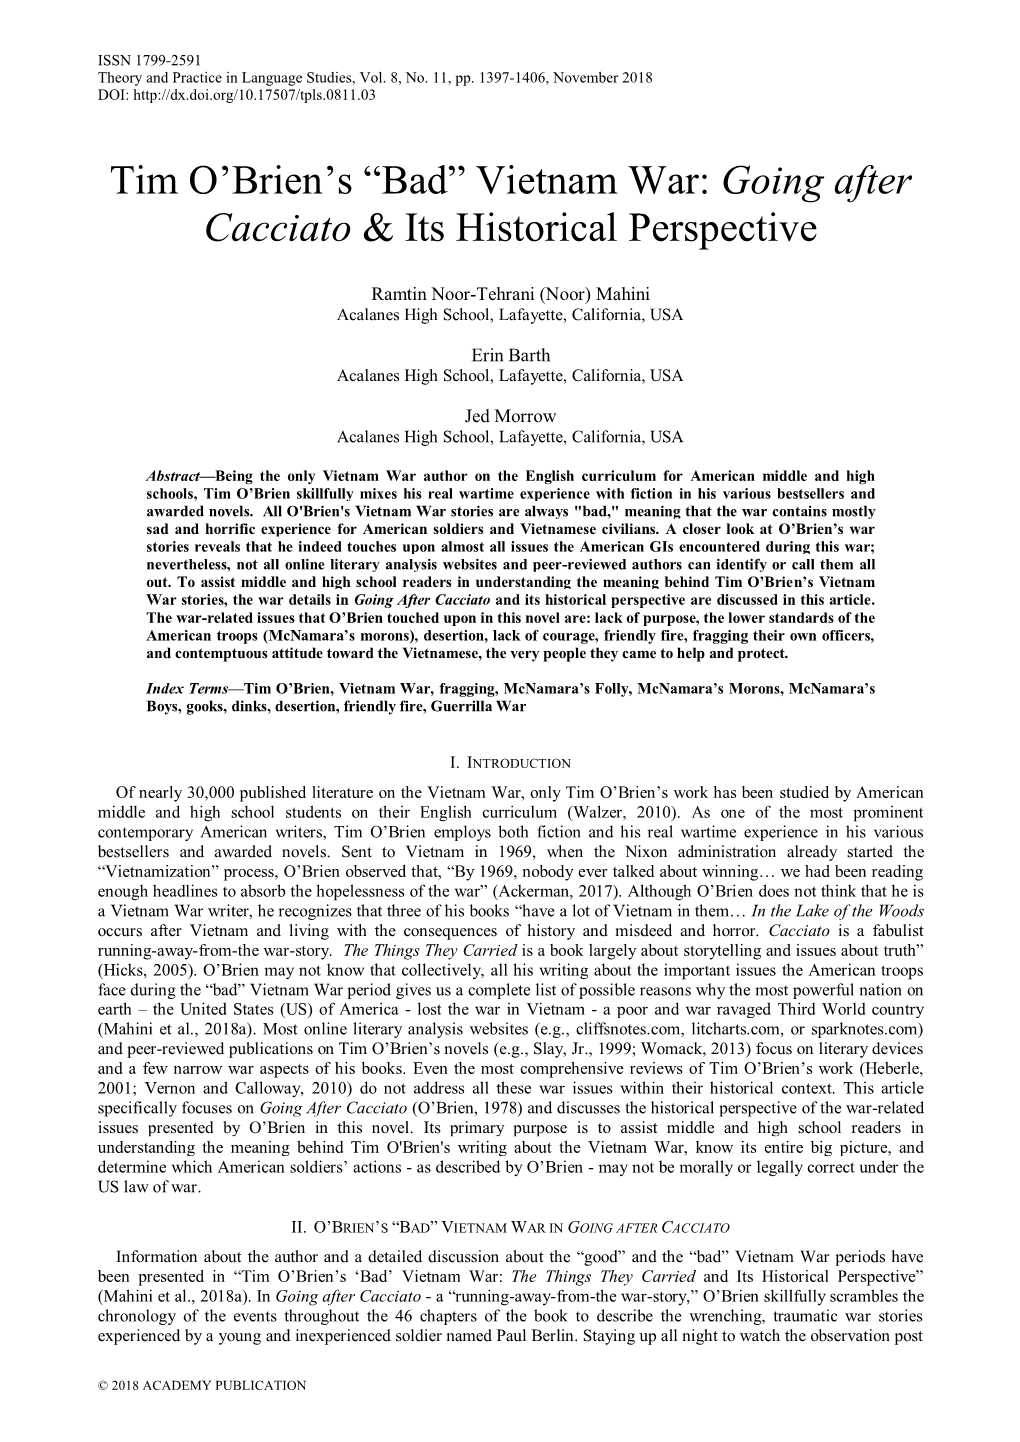 Vietnam War: Going After Cacciato & Its Historical Perspective